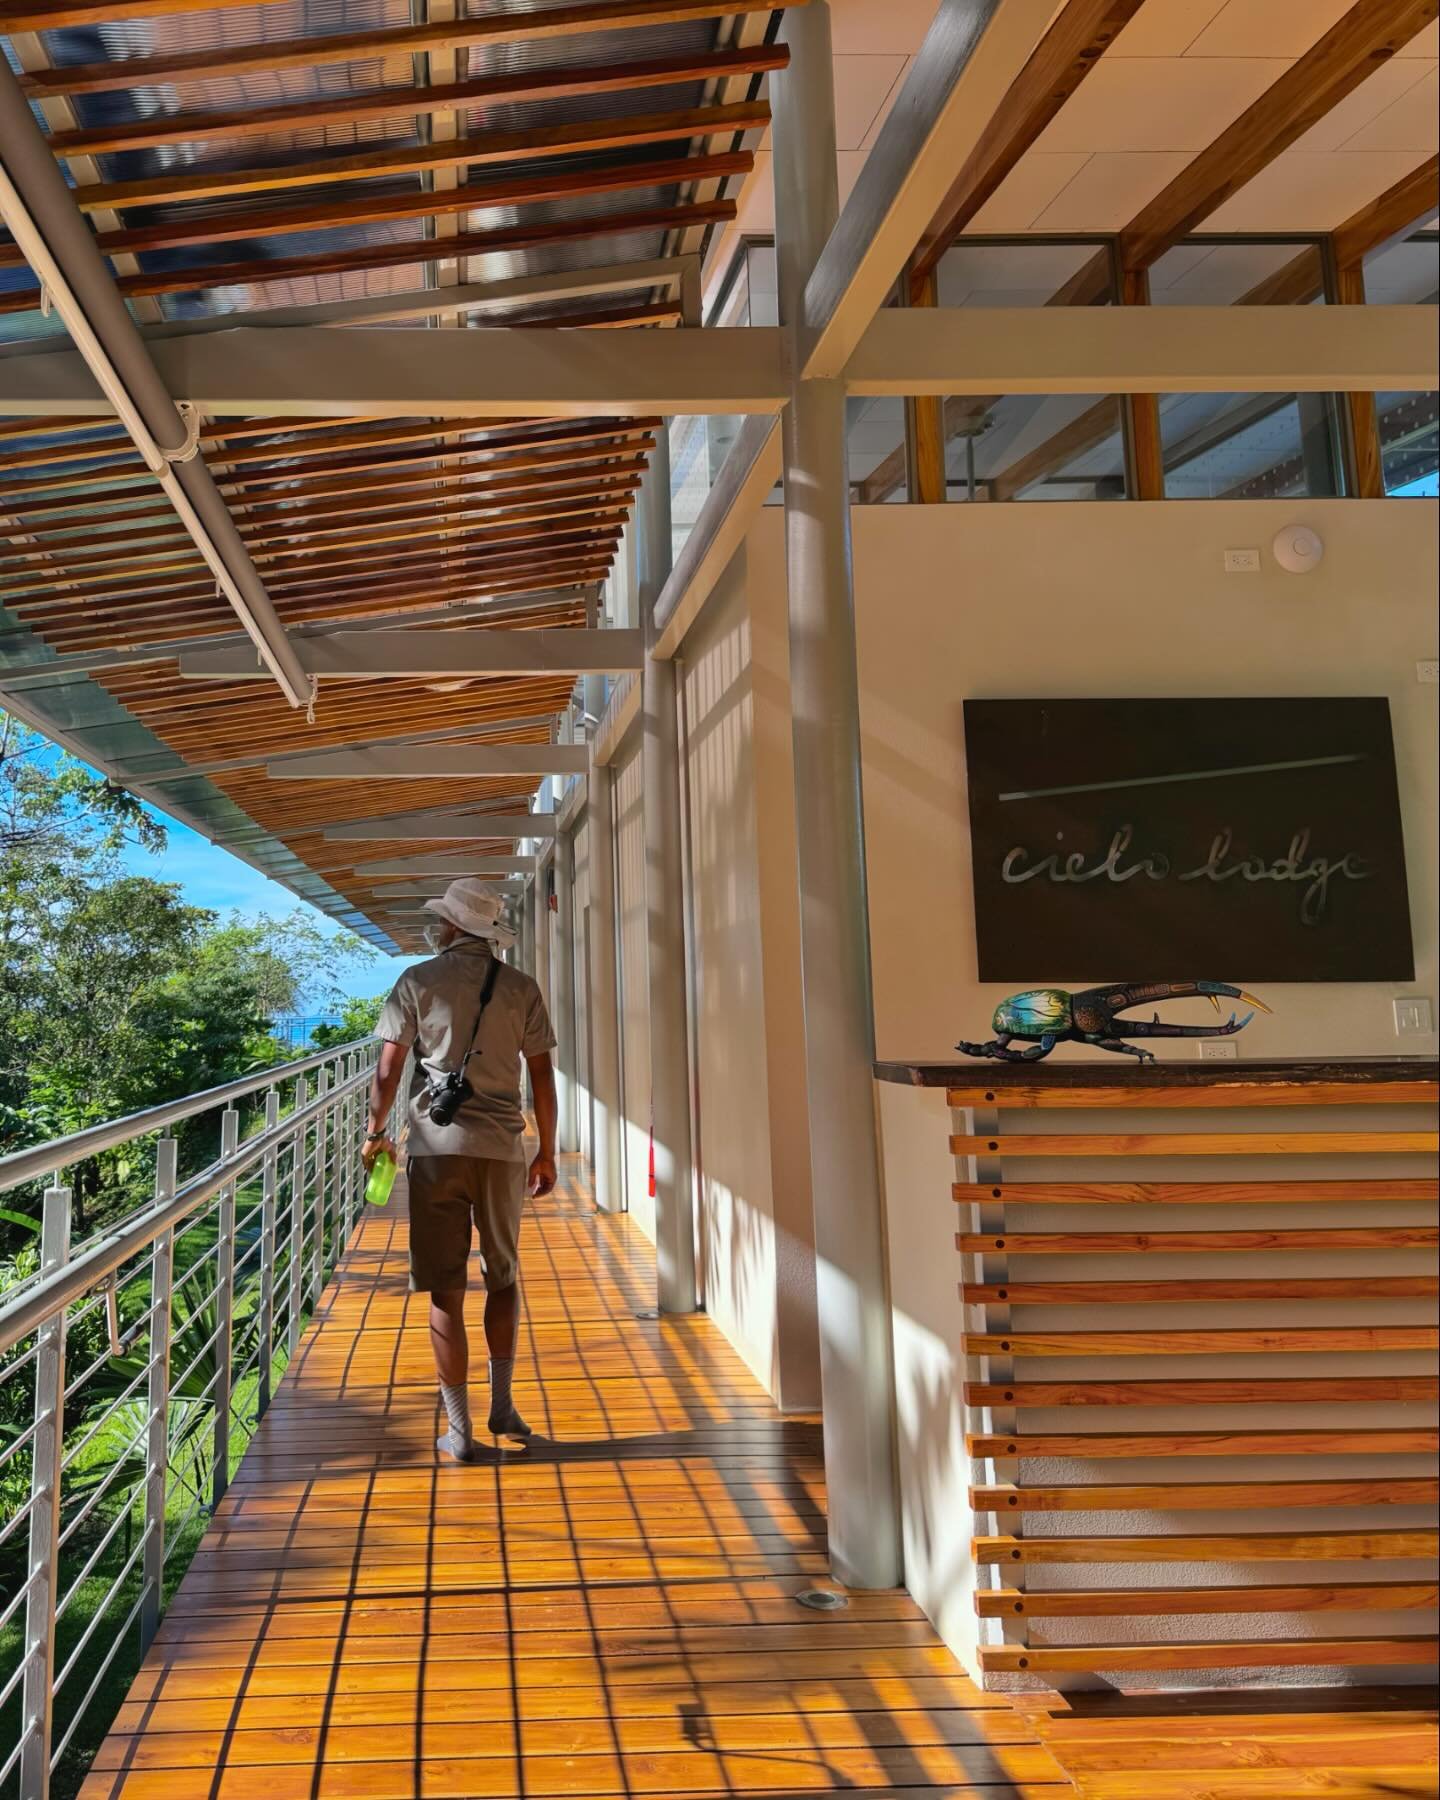 Our modern, minimalist architecture maximizes airflow &amp; breathtaking views, while minimizing impact on our fragile environment. 

Our focus on sustainability and comfort offers you a lofty window to the pristine jungle. 

Luxuriate in a hammock, 